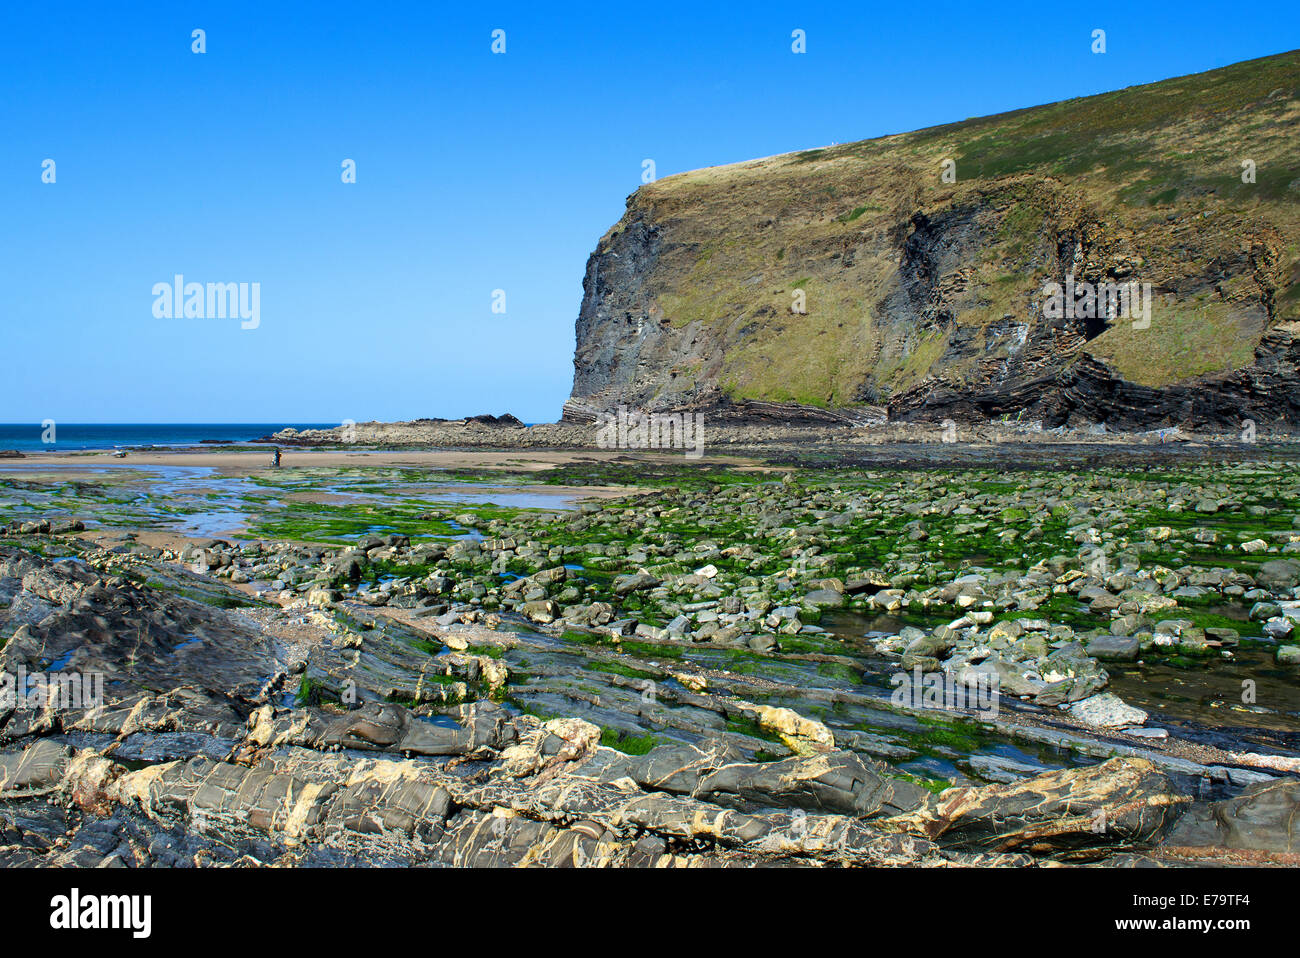 The rocky beach at Crackington Haven in North Cornwall, UK Stock Photo